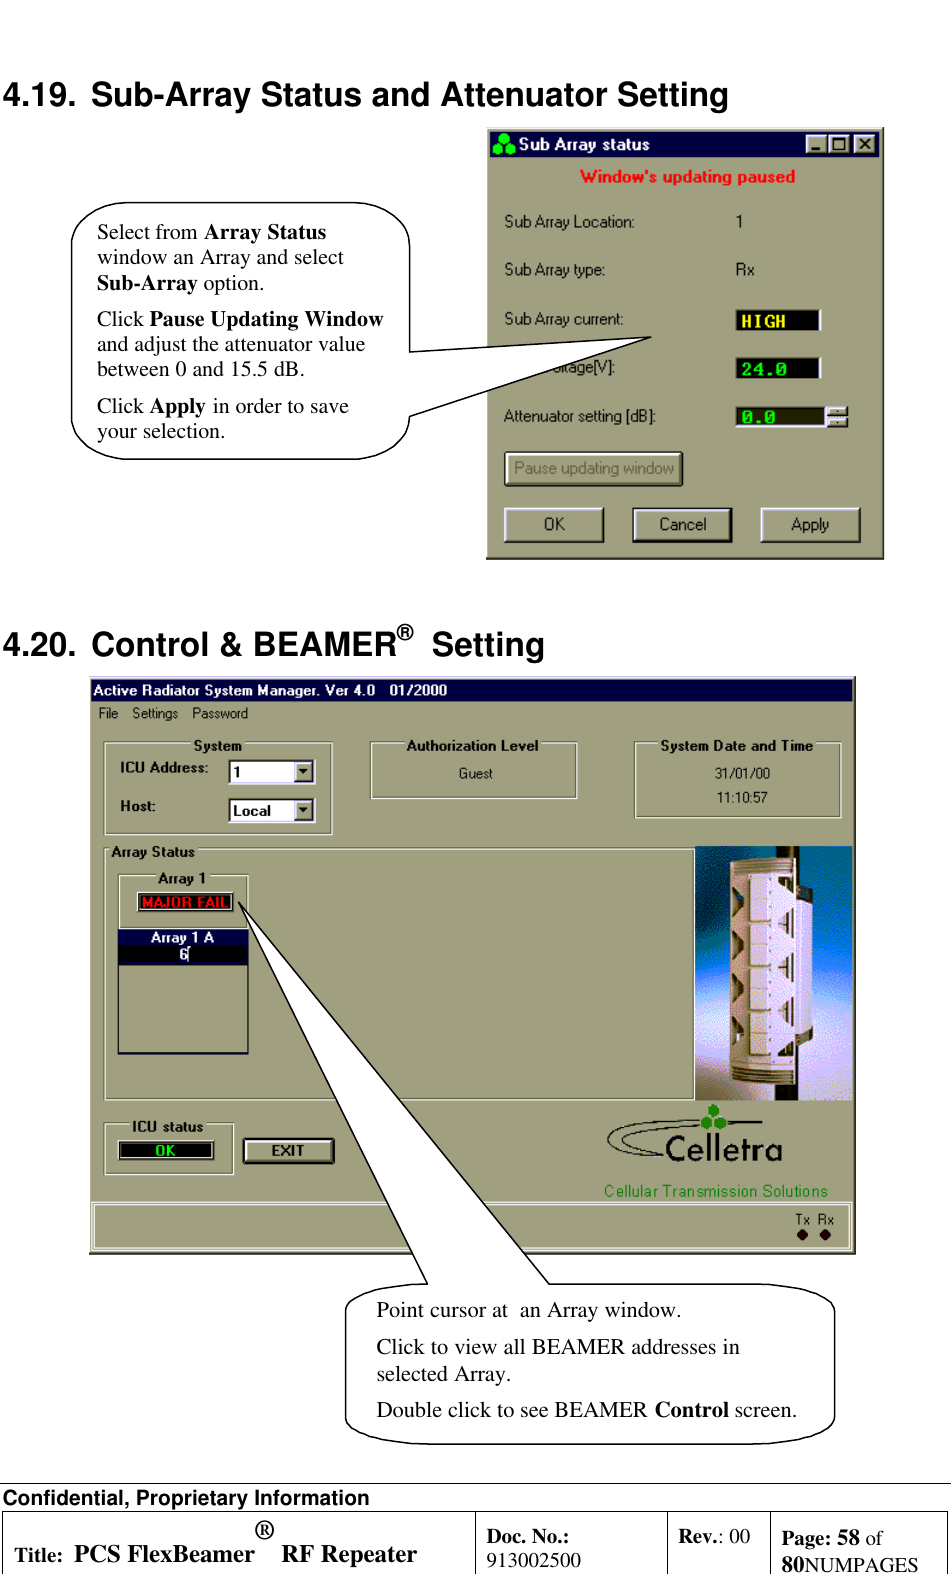 Confidential, Proprietary InformationTitle: PCS FlexBeamer® RF RepeaterSystem A &amp;O ManualDoc. No.:913002500 Rev.: 00 Page: 58 of80NUMPAGES4.19. Sub-Array Status and Attenuator SettingSelect from Array Statuswindow an Array and selectSub-Array option.Click Pause Updating Windowand adjust the attenuator valuebetween 0 and 15.5 dB.Click Apply in order to saveyour selection.4.20. Control &amp; BEAMER®  SettingPoint cursor at  an Array window.Click to view all BEAMER addresses inselected Array.Double click to see BEAMER Control screen.